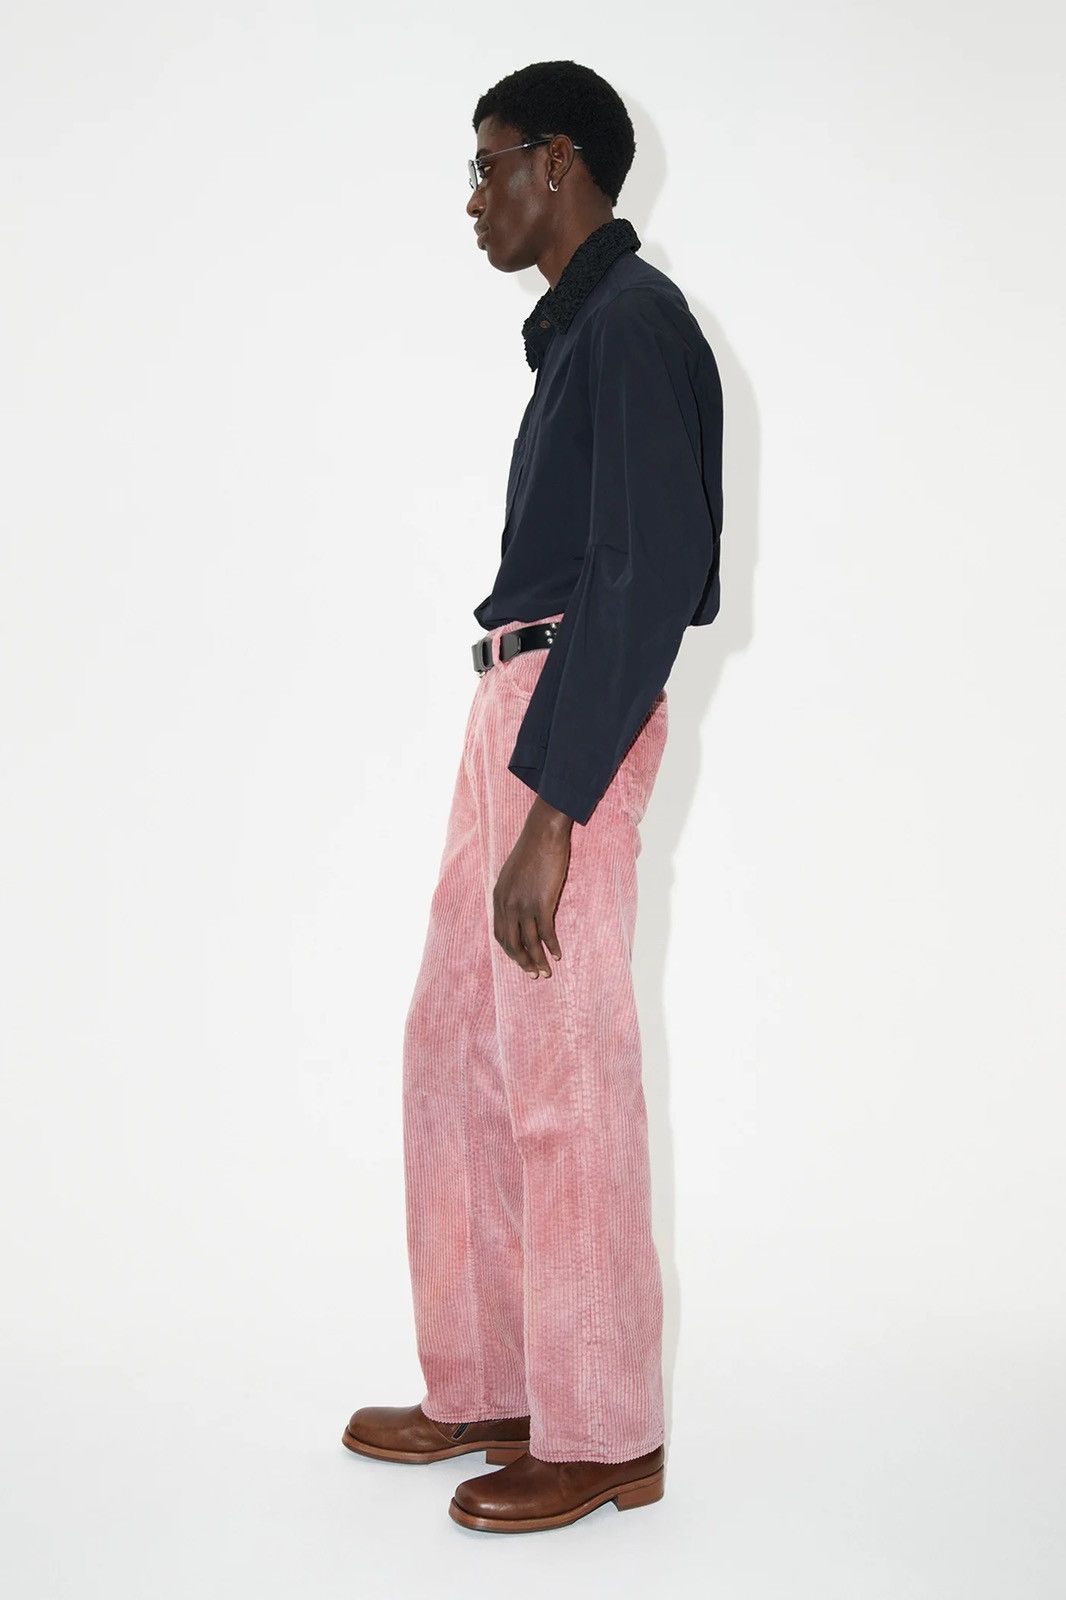 Our Legacy Our Legacy 70s Cut Antique Pink Rustic Corduroy Pants | Grailed